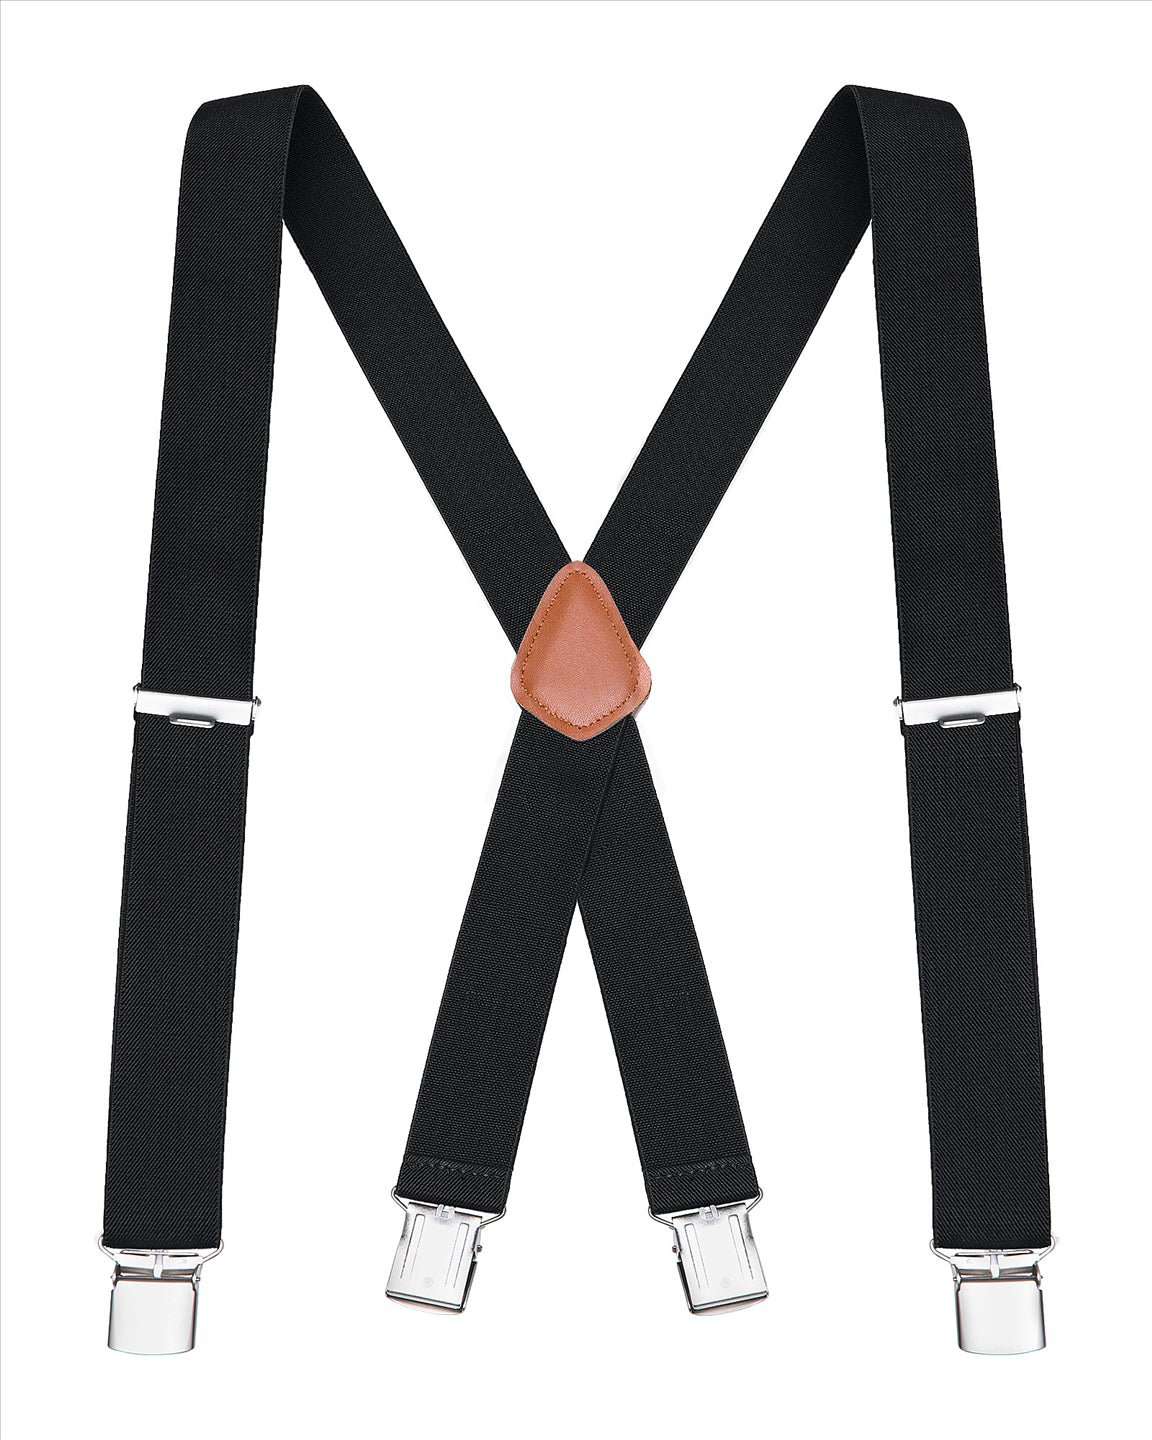 Buyless Fashion Suspenders for Men - 48